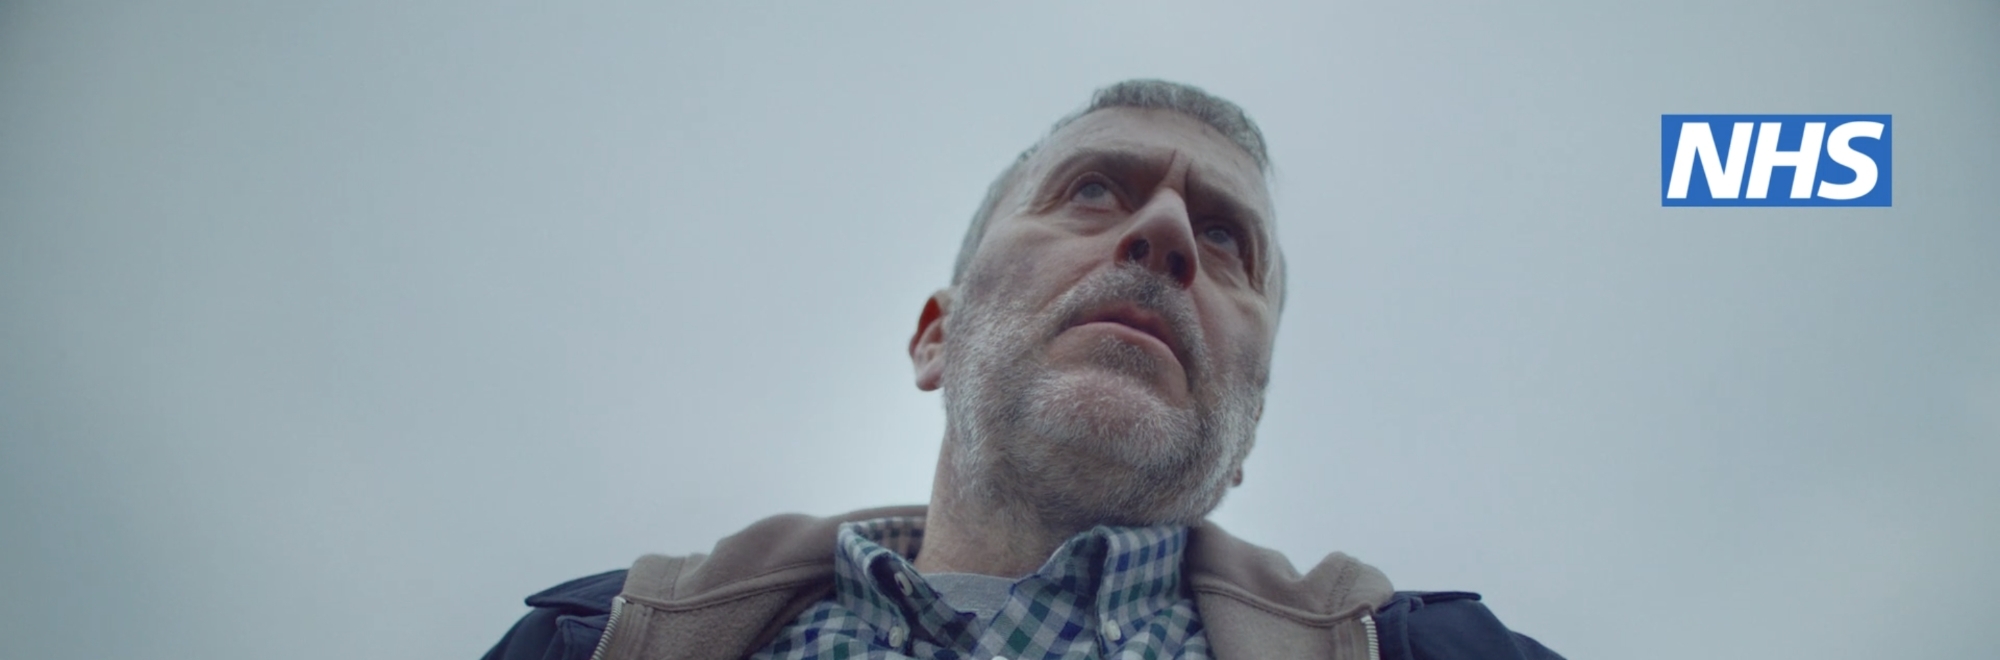 NHS England marks Valentine’s day with hard-hitting heart attack campaign by M&C Saatchi